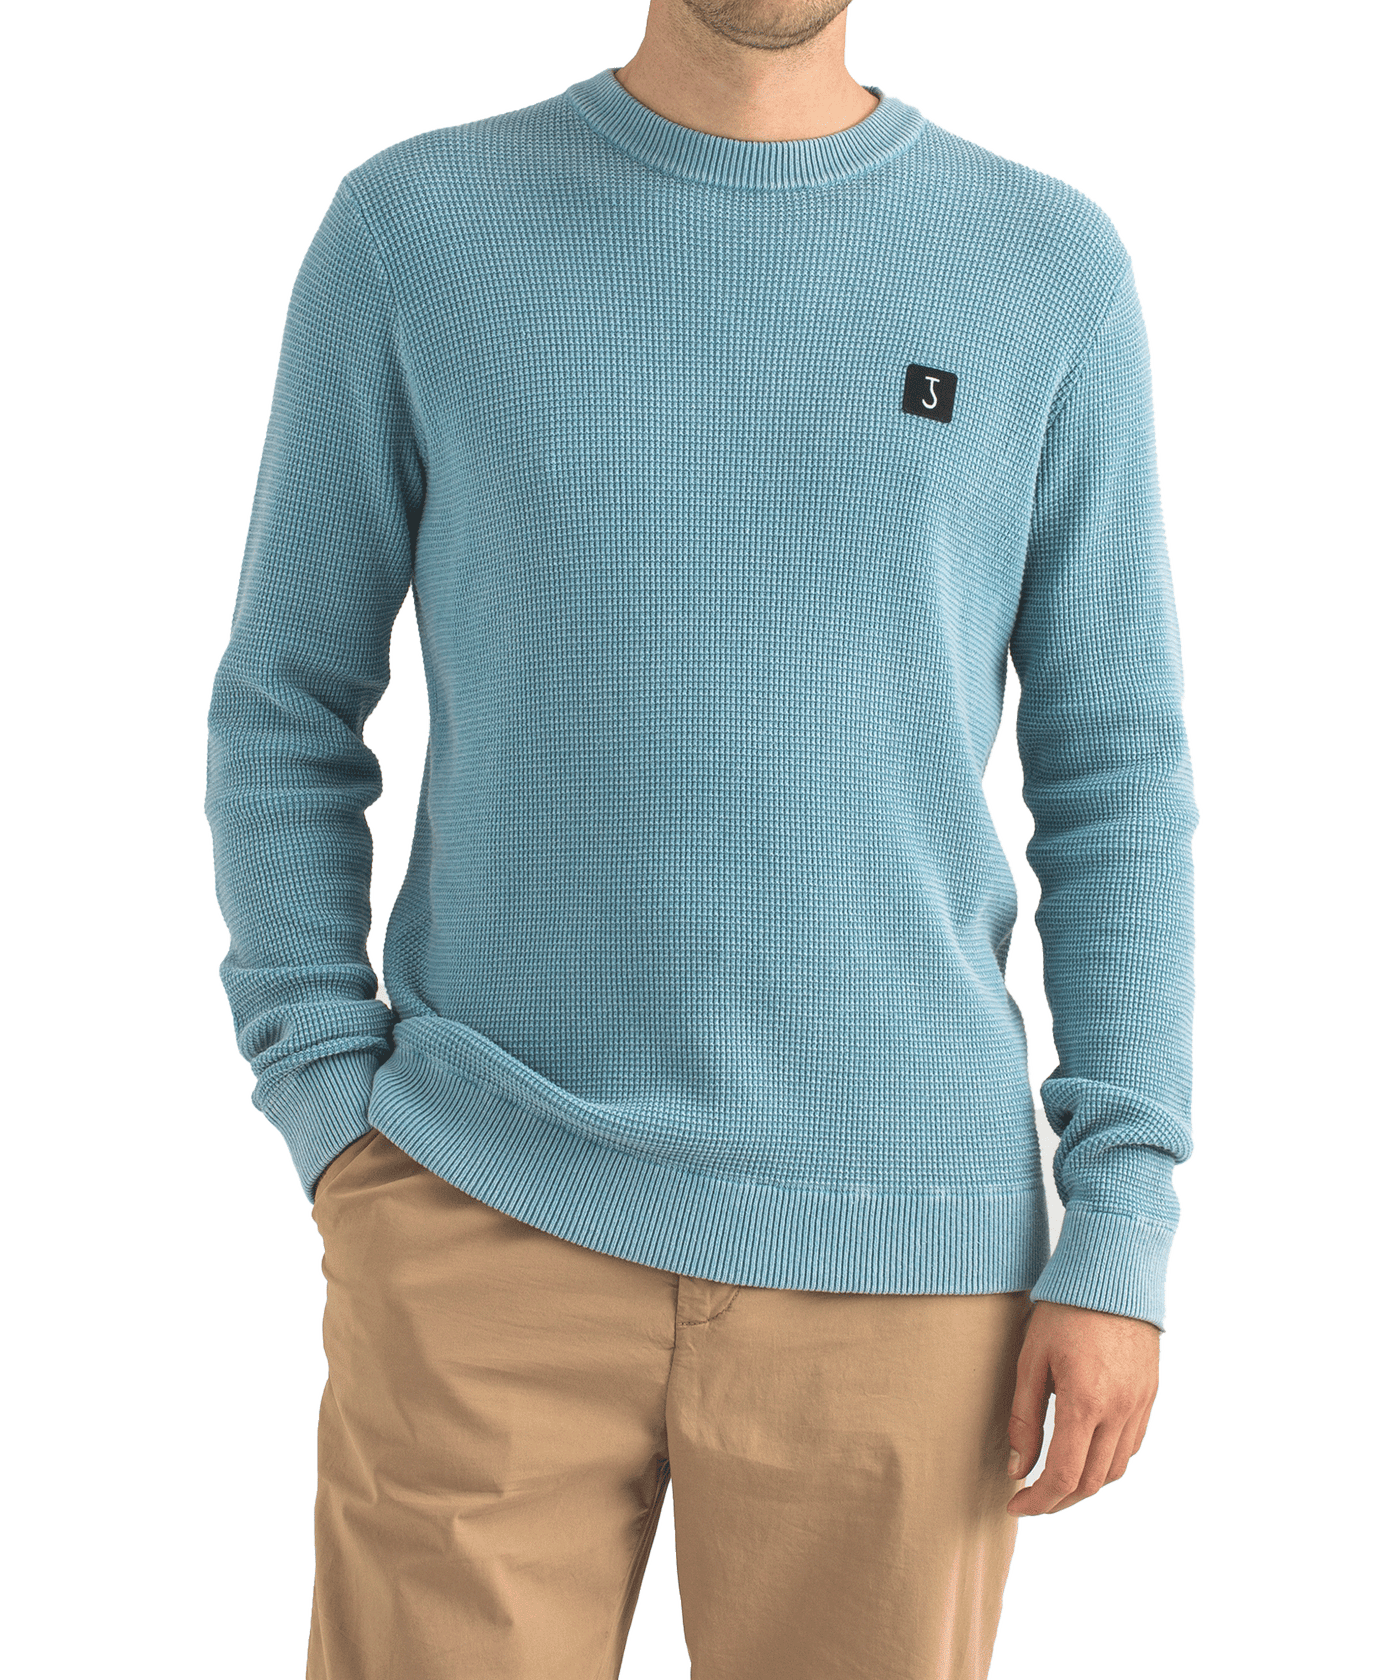 Butcher of Blue - M2126019 - Square Crew - 803 Biscay Blue